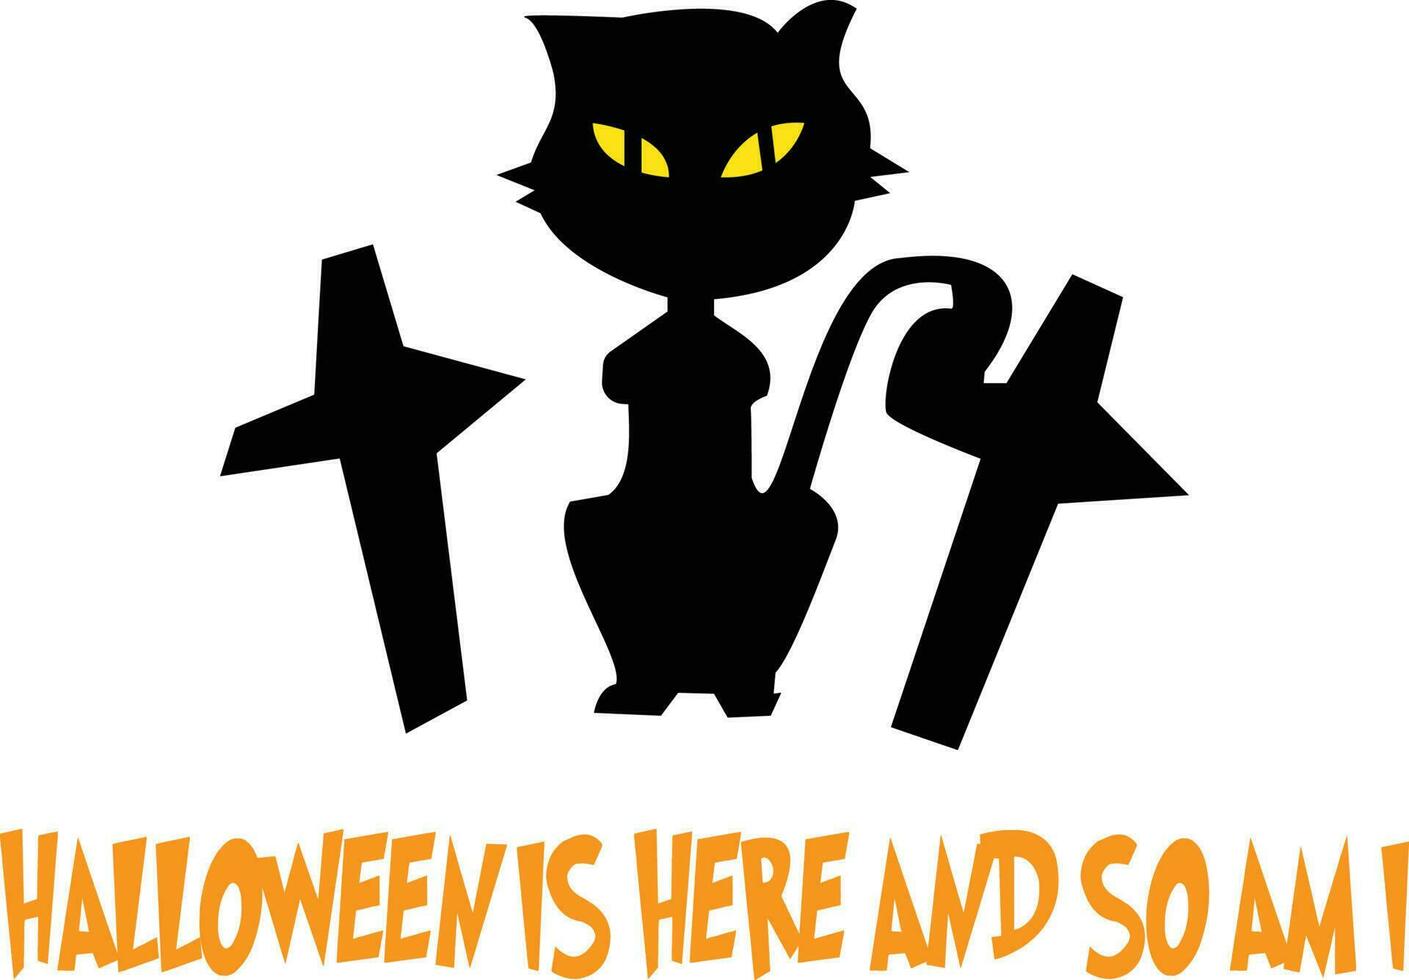 Halloween Is Here So Am I Cat T-Shirt Design Vector File